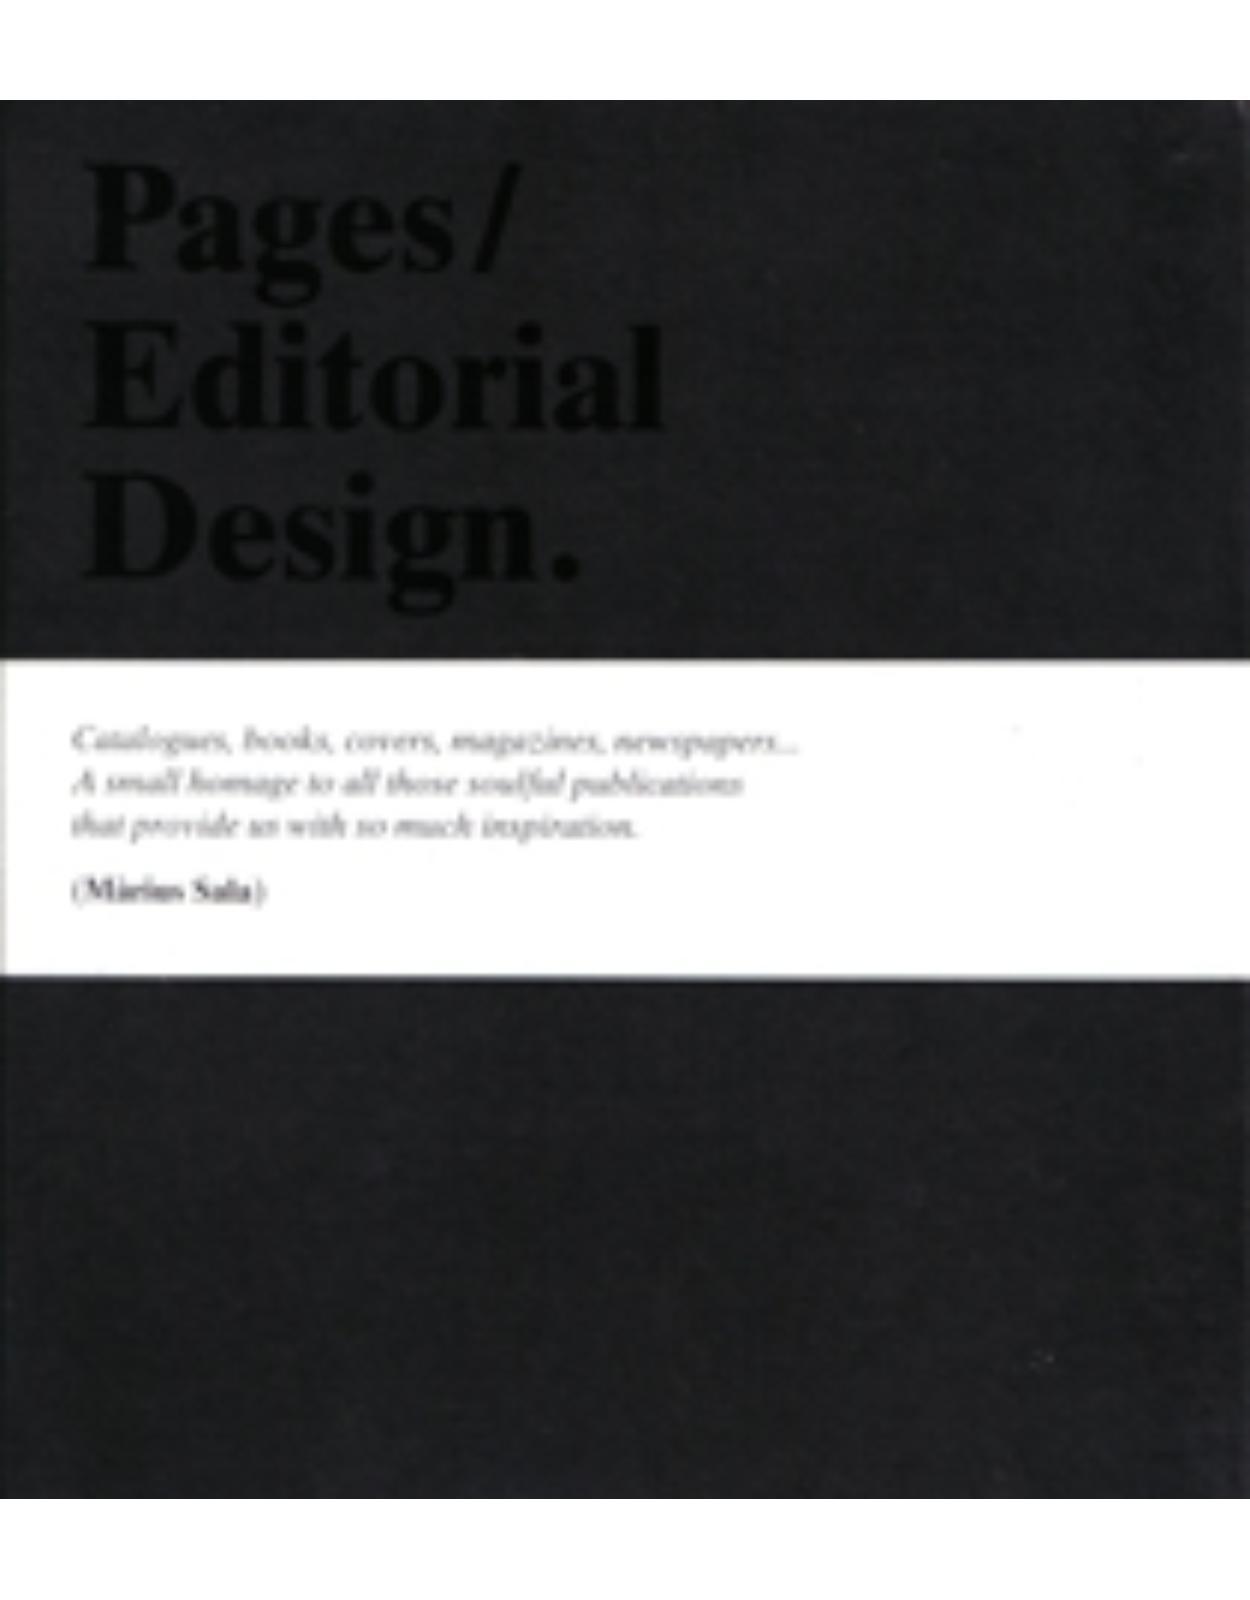 Pages. Editorial Design